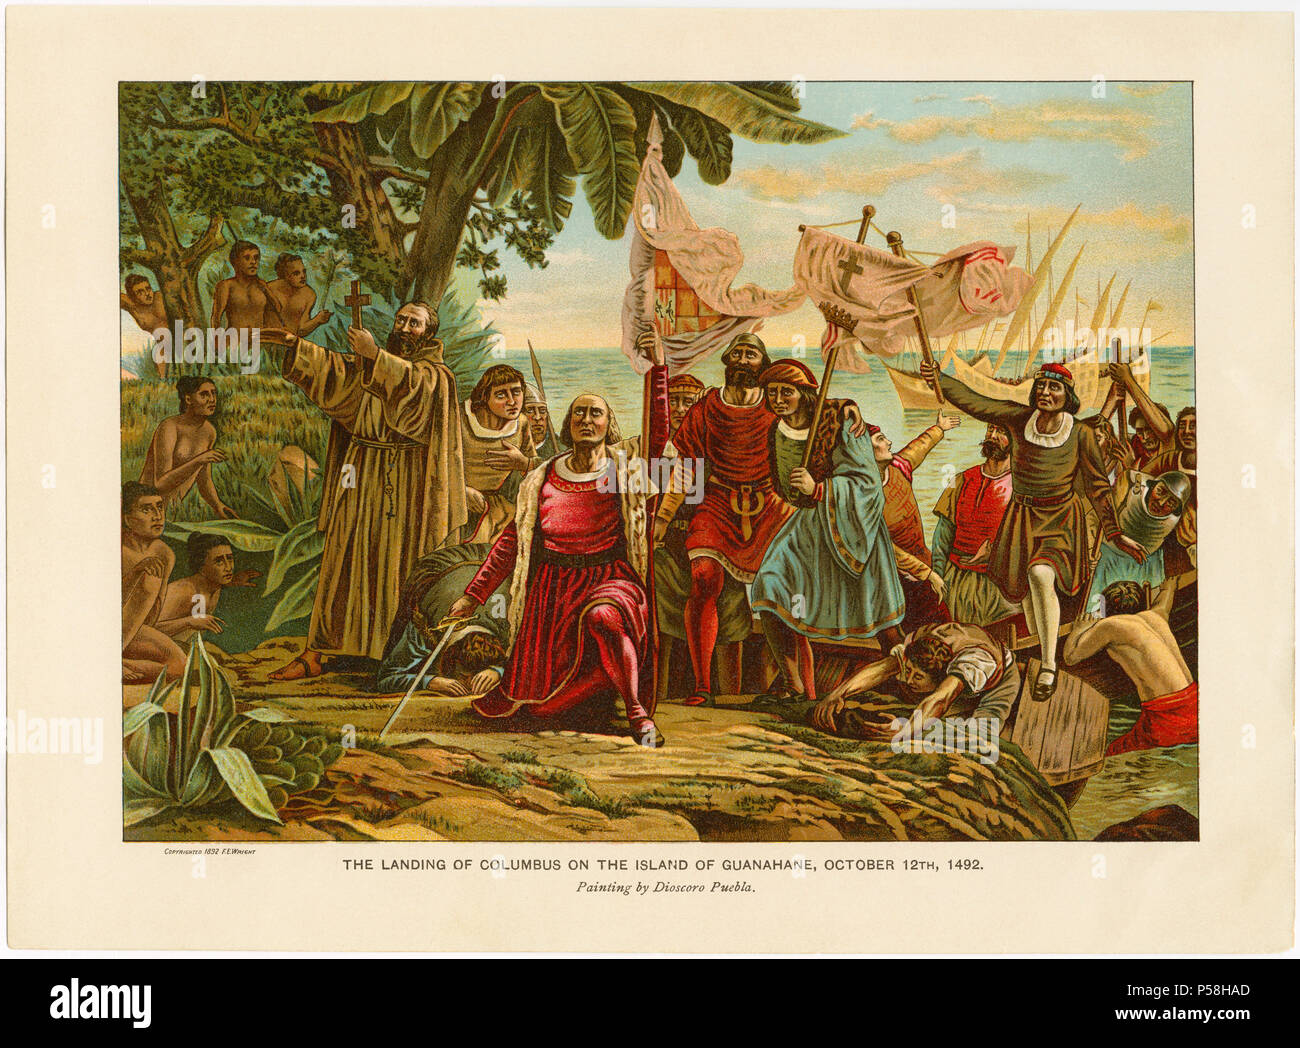 The Landing of Columbus on the Island of Guanahane, October 12, 1492, Chromolithograph from a Painting by Dioscoro Puebla, 1892 Stock Photo